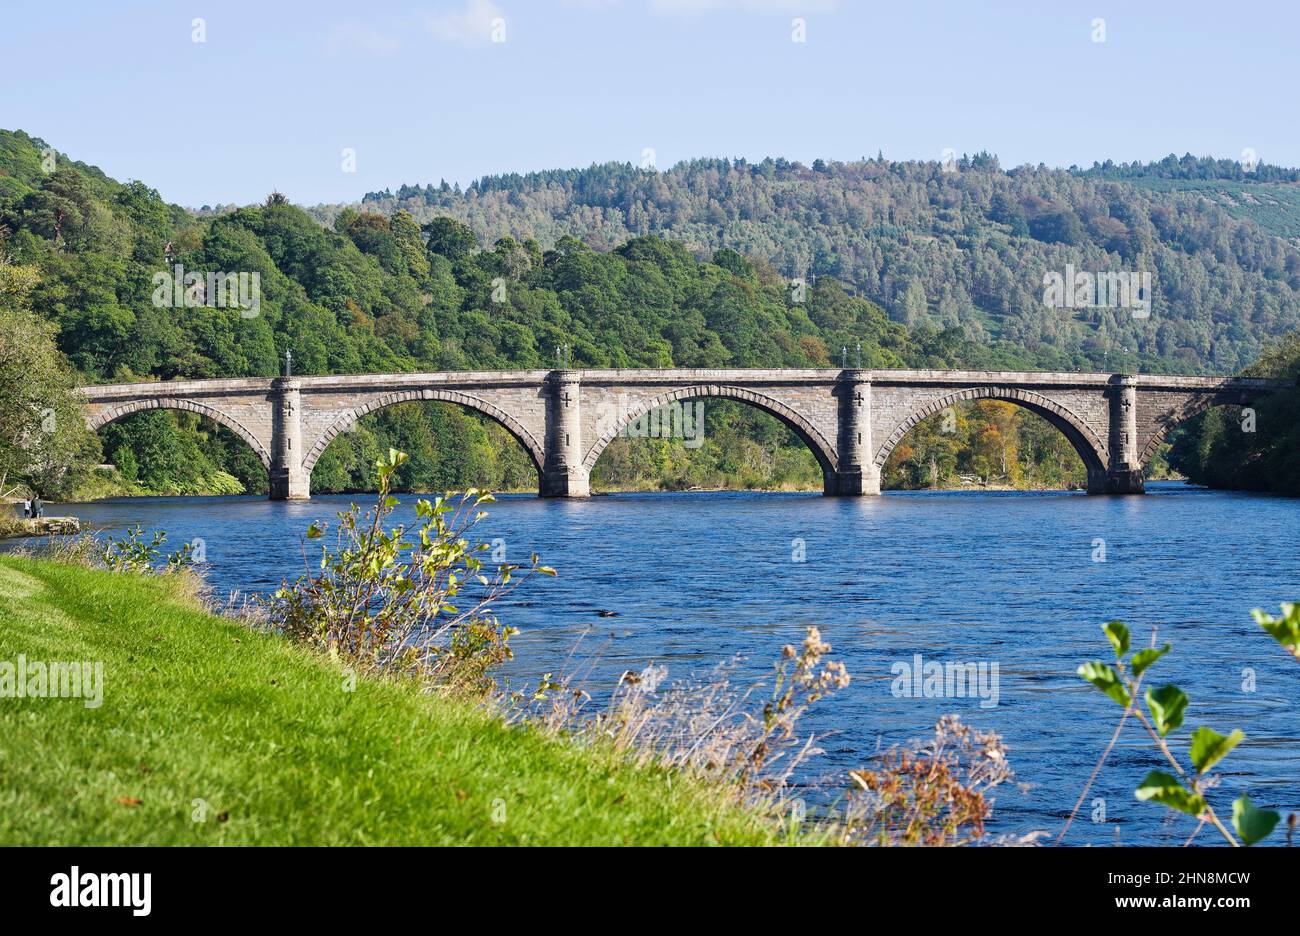 The old arched bridge over the River Tay at Dunkeld, Perthshire, Scotland, with thickly wooded hillsides forming a colourful green backdrop. Stock Photo